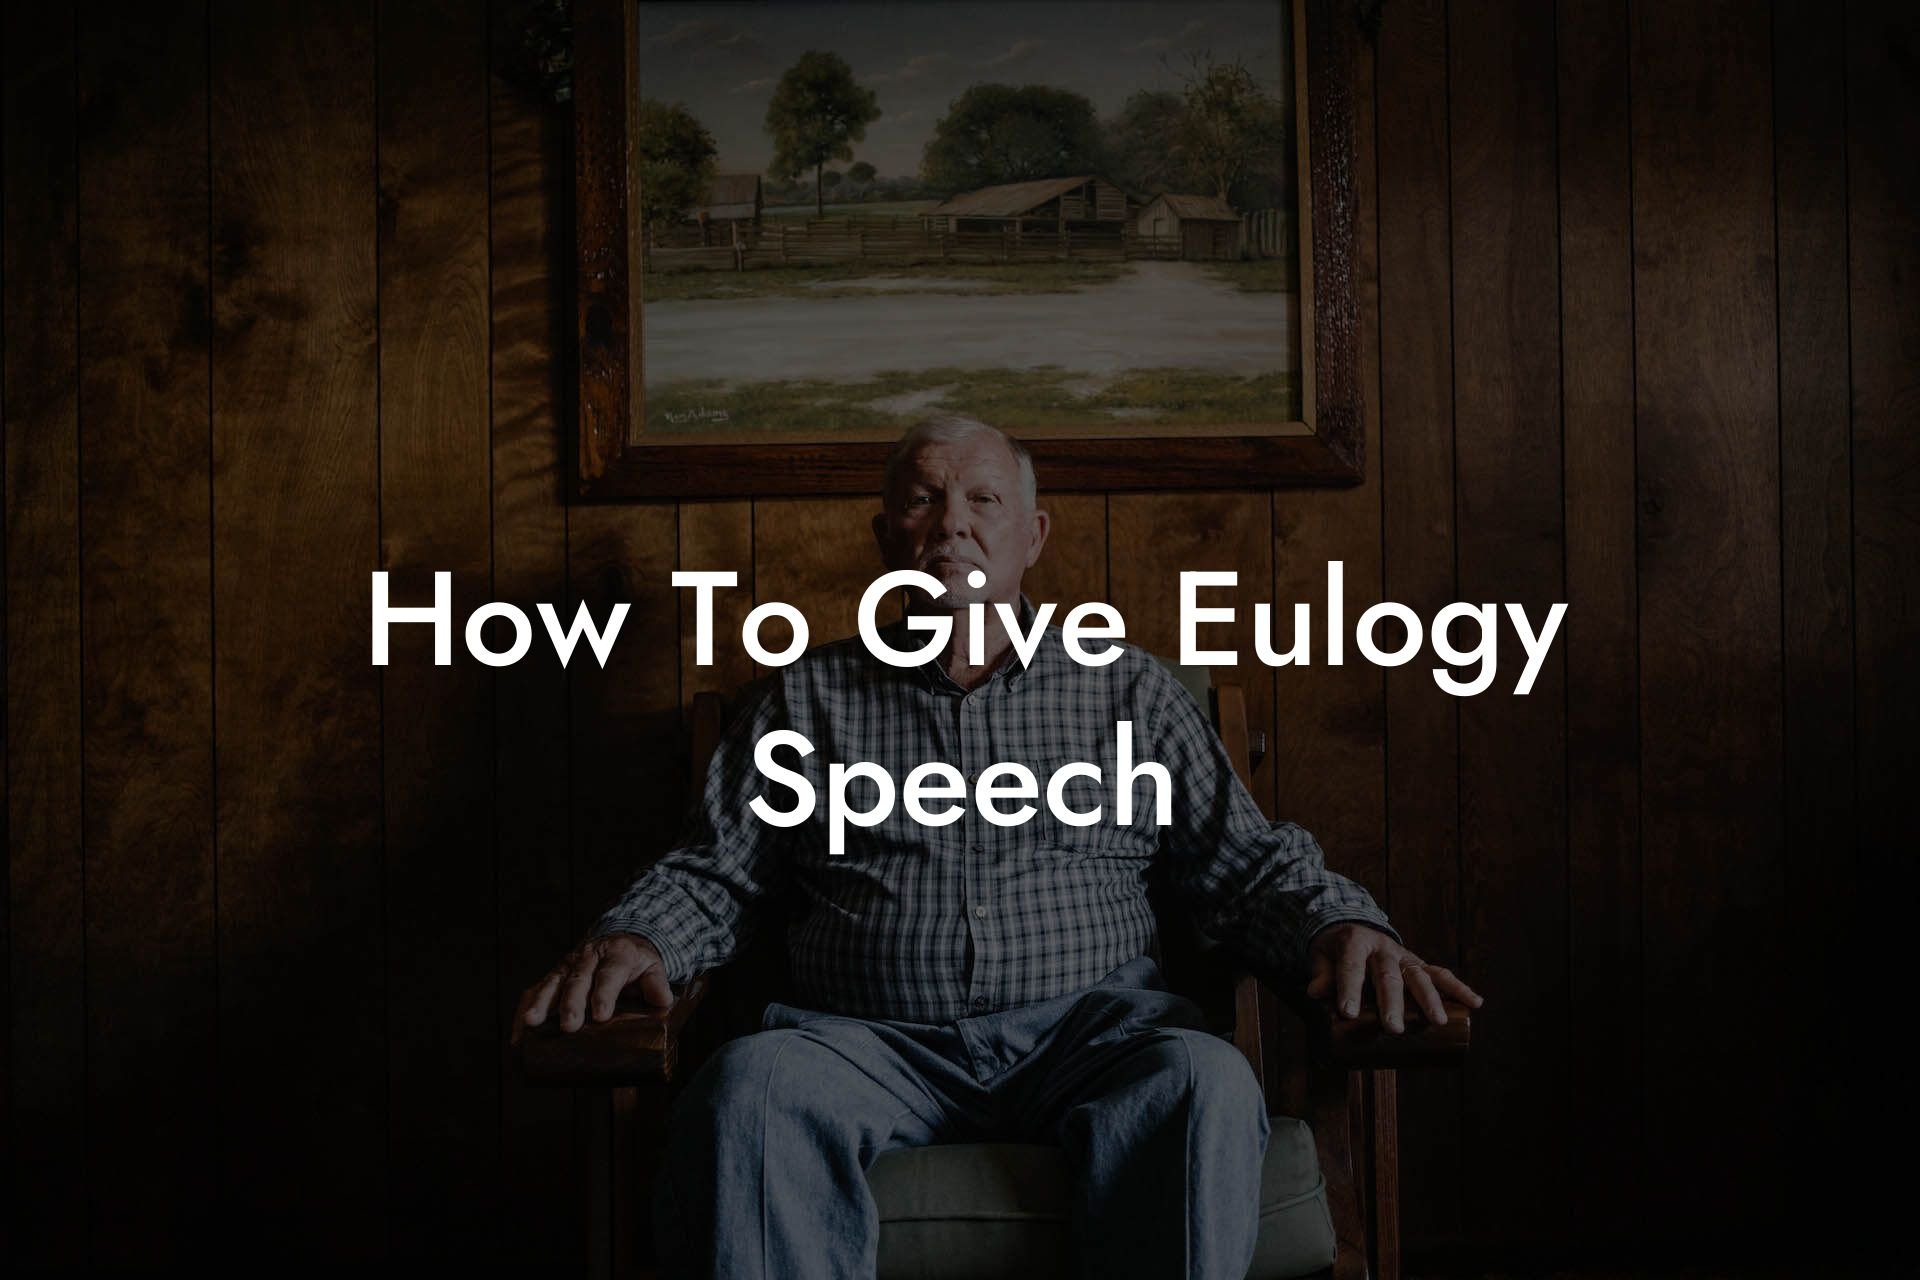 How To Give Eulogy Speech